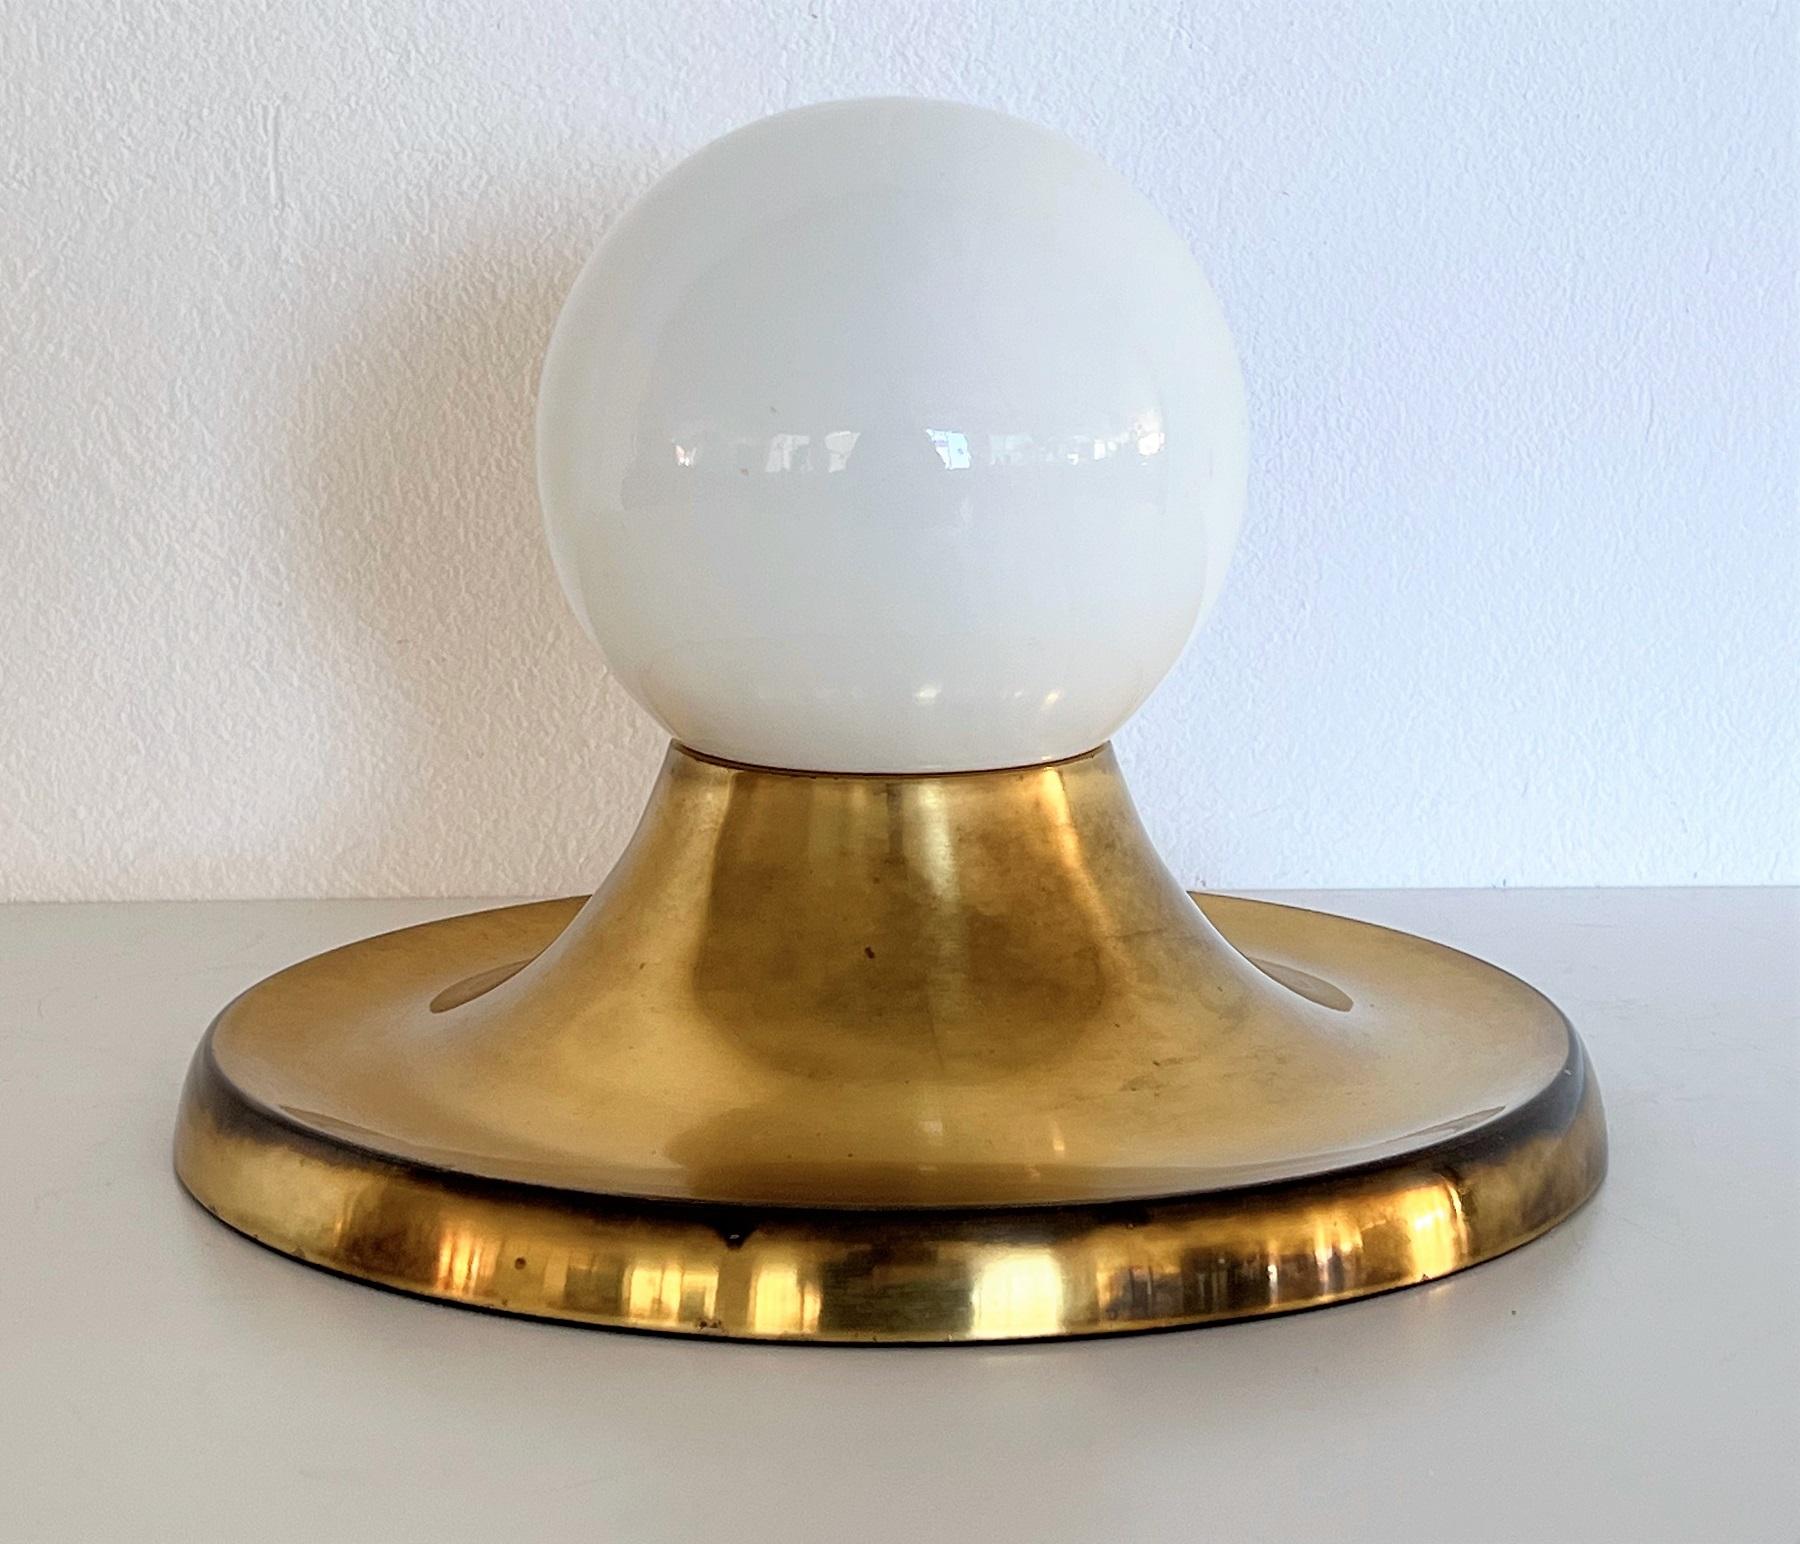 Italian Achille Castiglioni 'Light Ball' Wall or Ceiling Lamp for Flos, 1960s For Sale 10